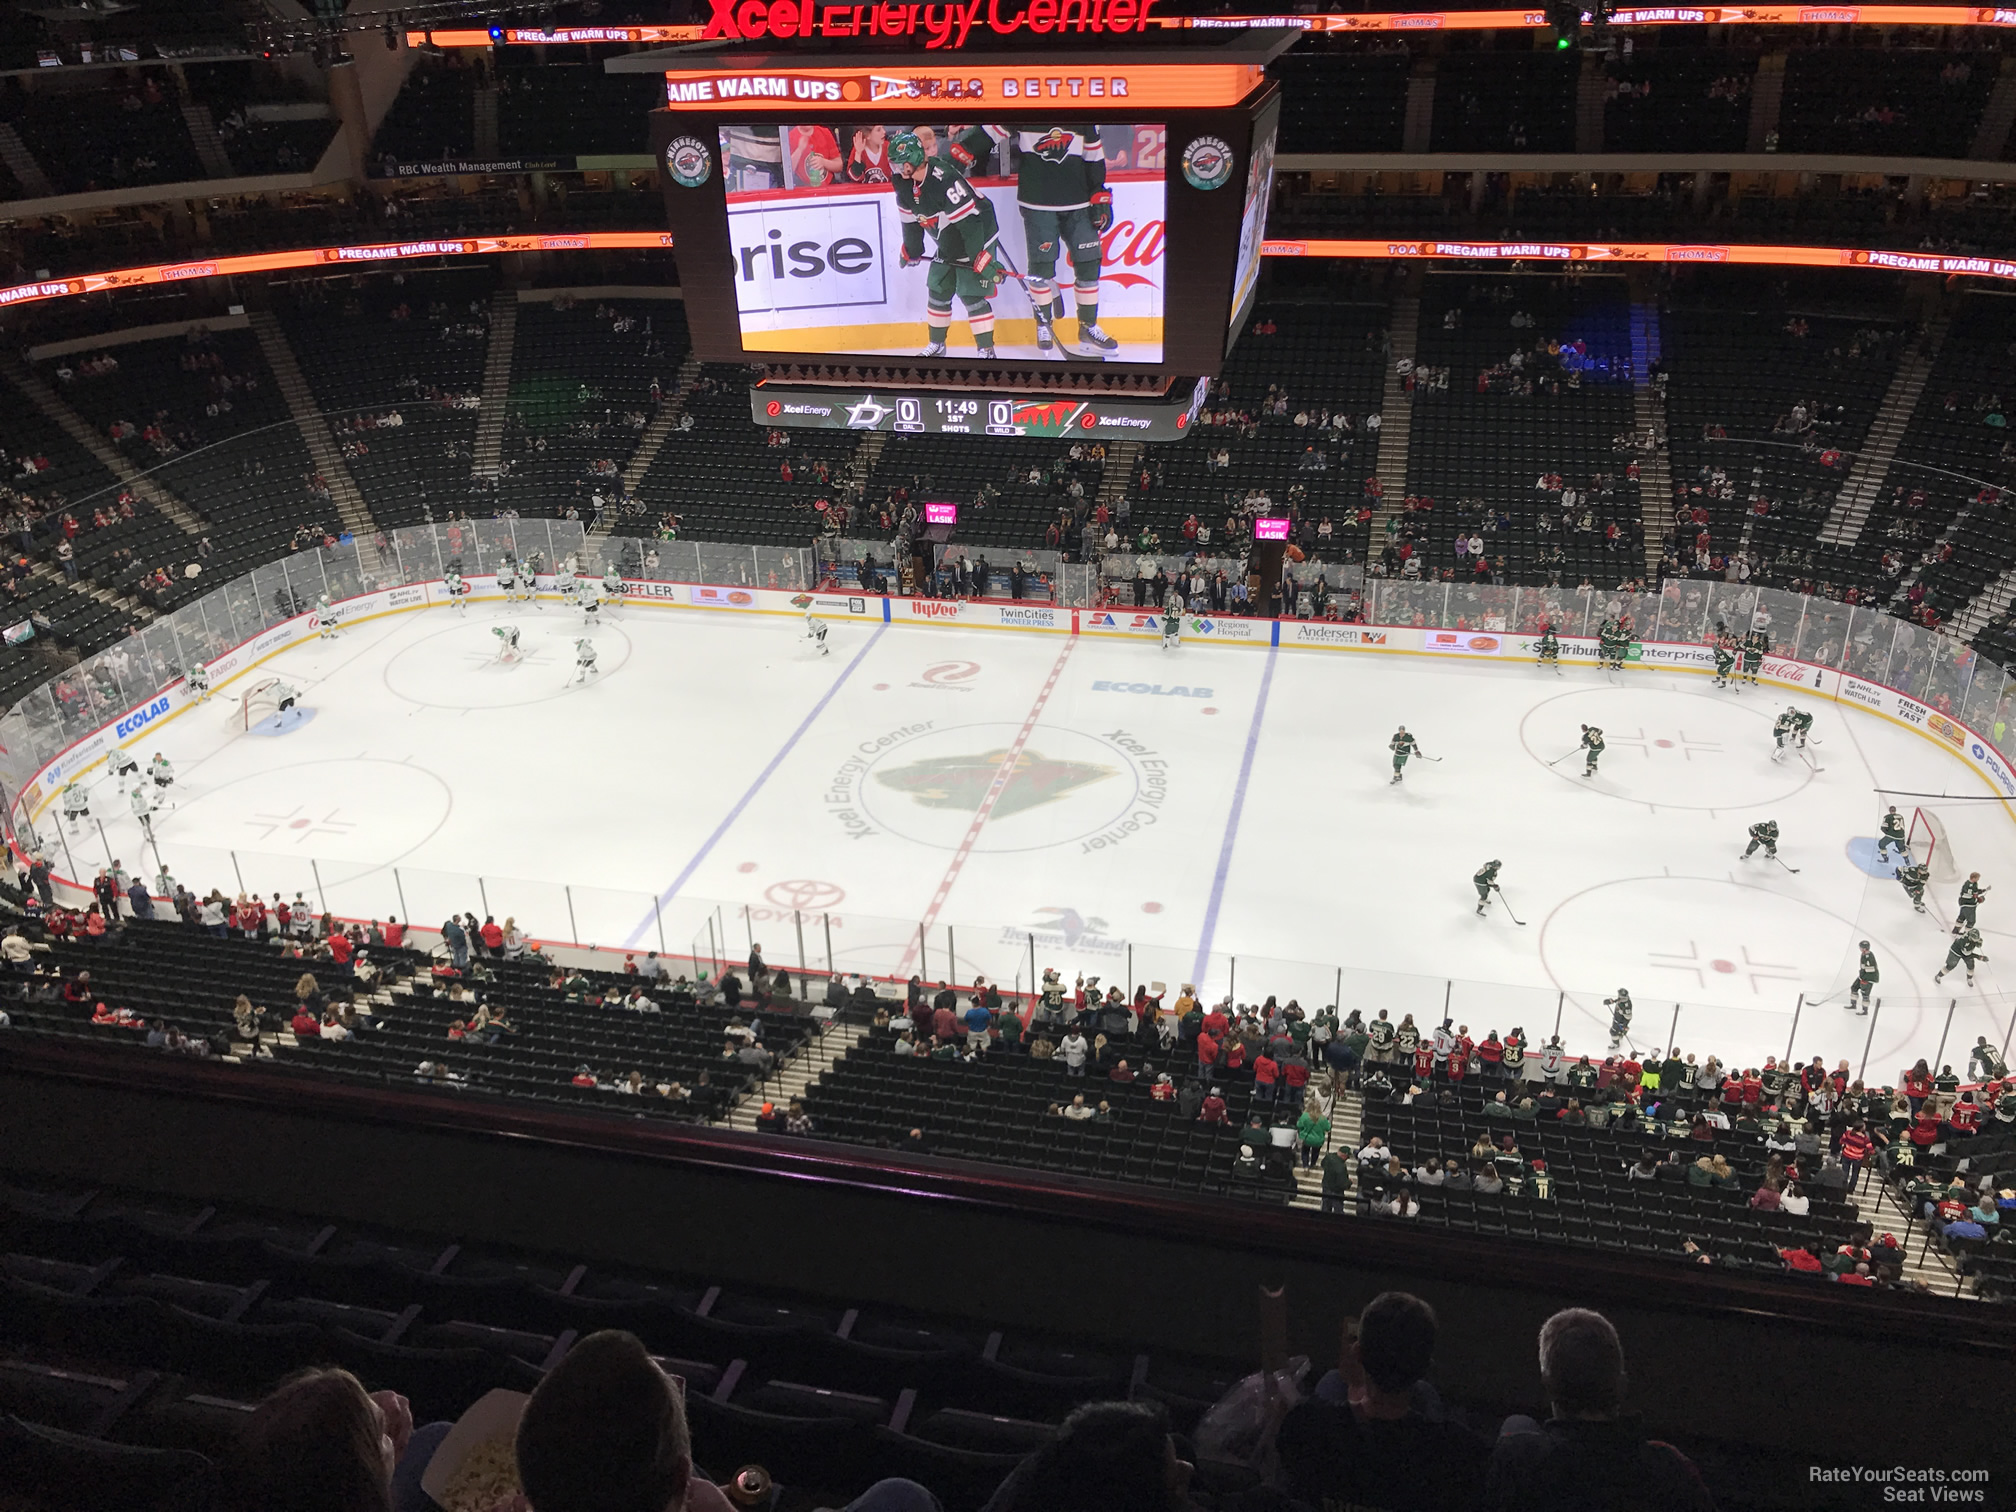 section 203, row 6 seat view  for hockey - xcel energy center